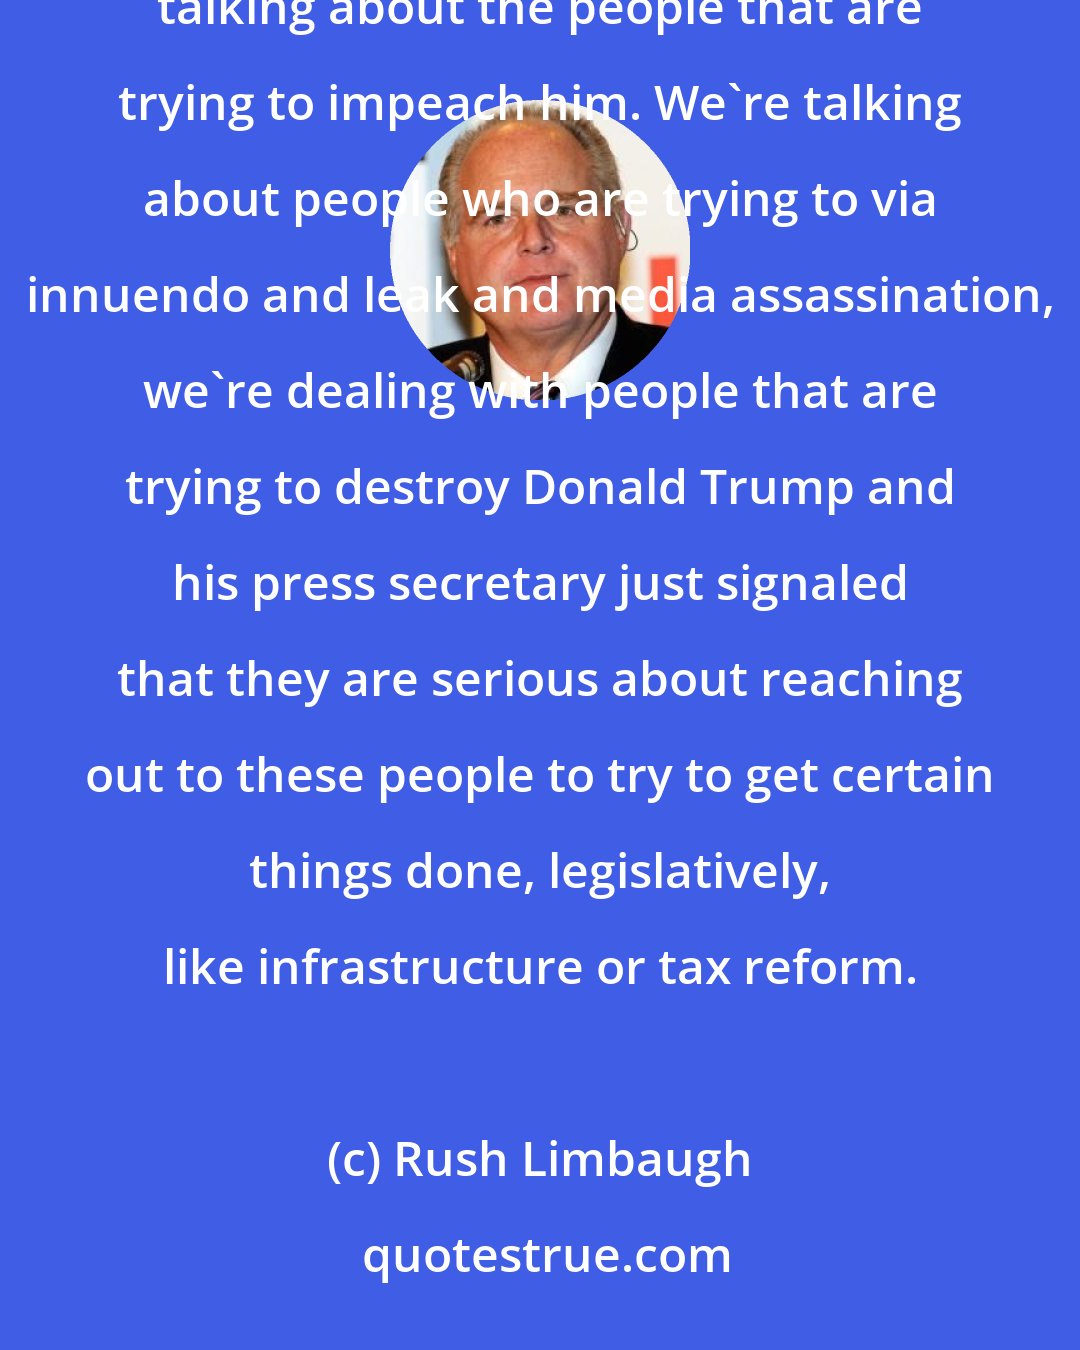 Rush Limbaugh: Who are we talking about? We're talking about the people that are trying to criminalize Donald Trump. We're talking about the people that are trying to impeach him. We're talking about people who are trying to via innuendo and leak and media assassination, we're dealing with people that are trying to destroy Donald Trump and his press secretary just signaled that they are serious about reaching out to these people to try to get certain things done, legislatively, like infrastructure or tax reform.